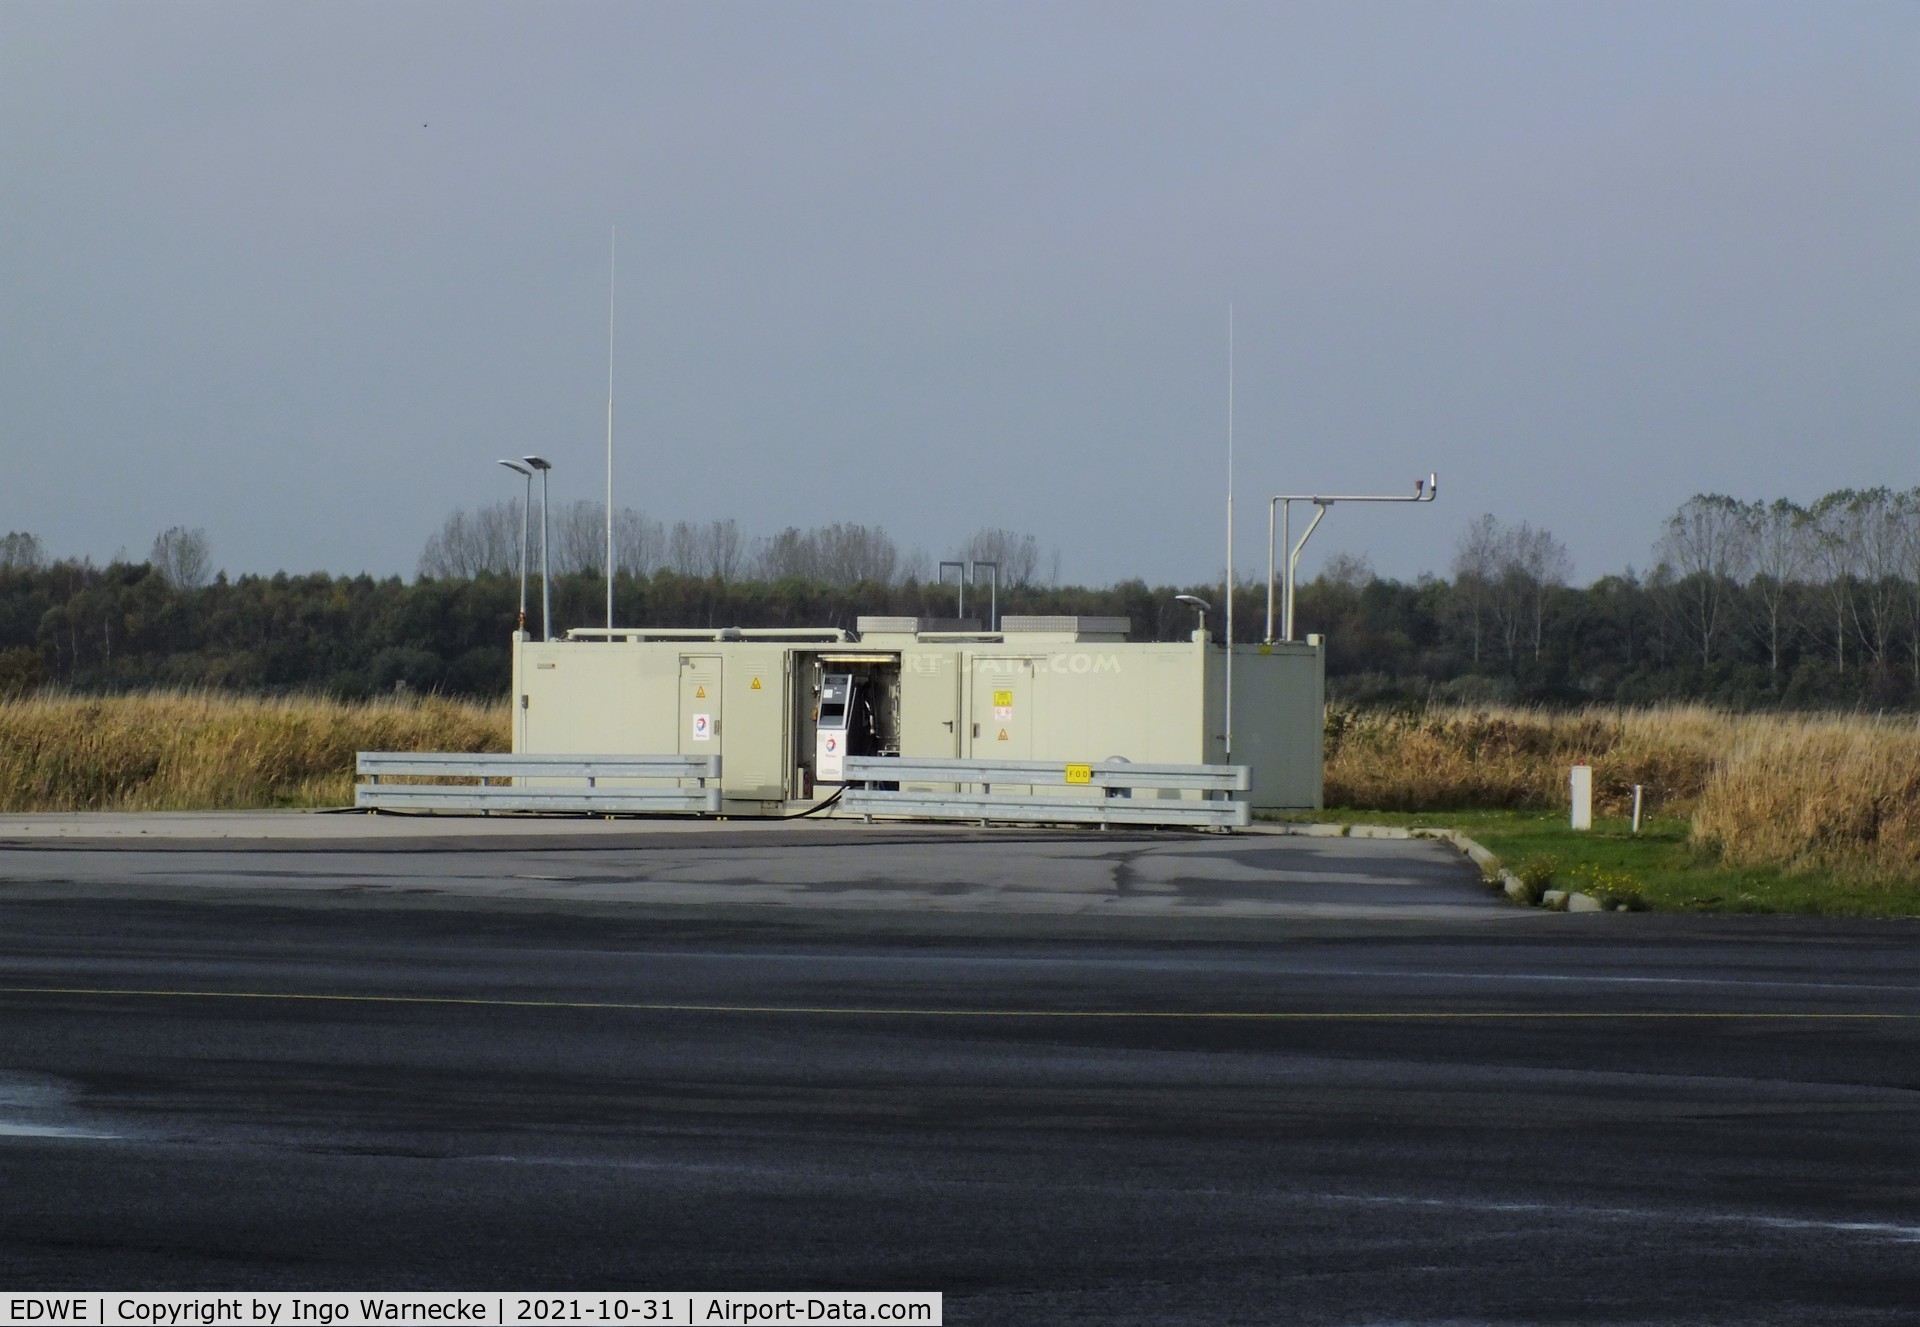 EDWE Airport - apron and fuelling station east of the tower at Emden airfield